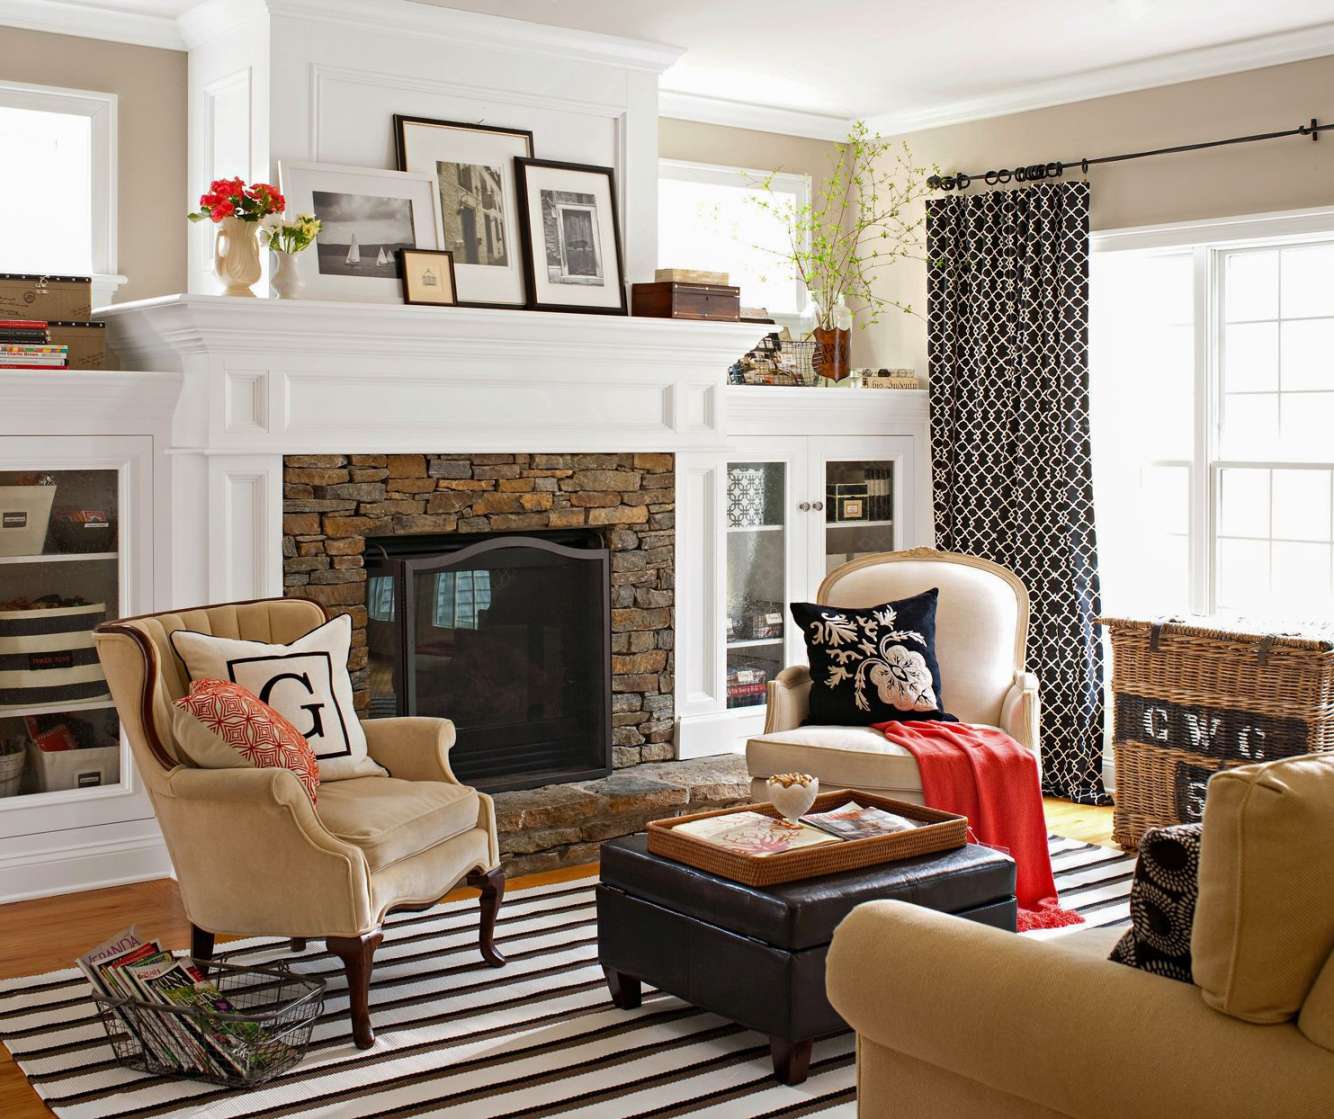 Ideas for Built-Ins Around a Fireplace that Add Character and